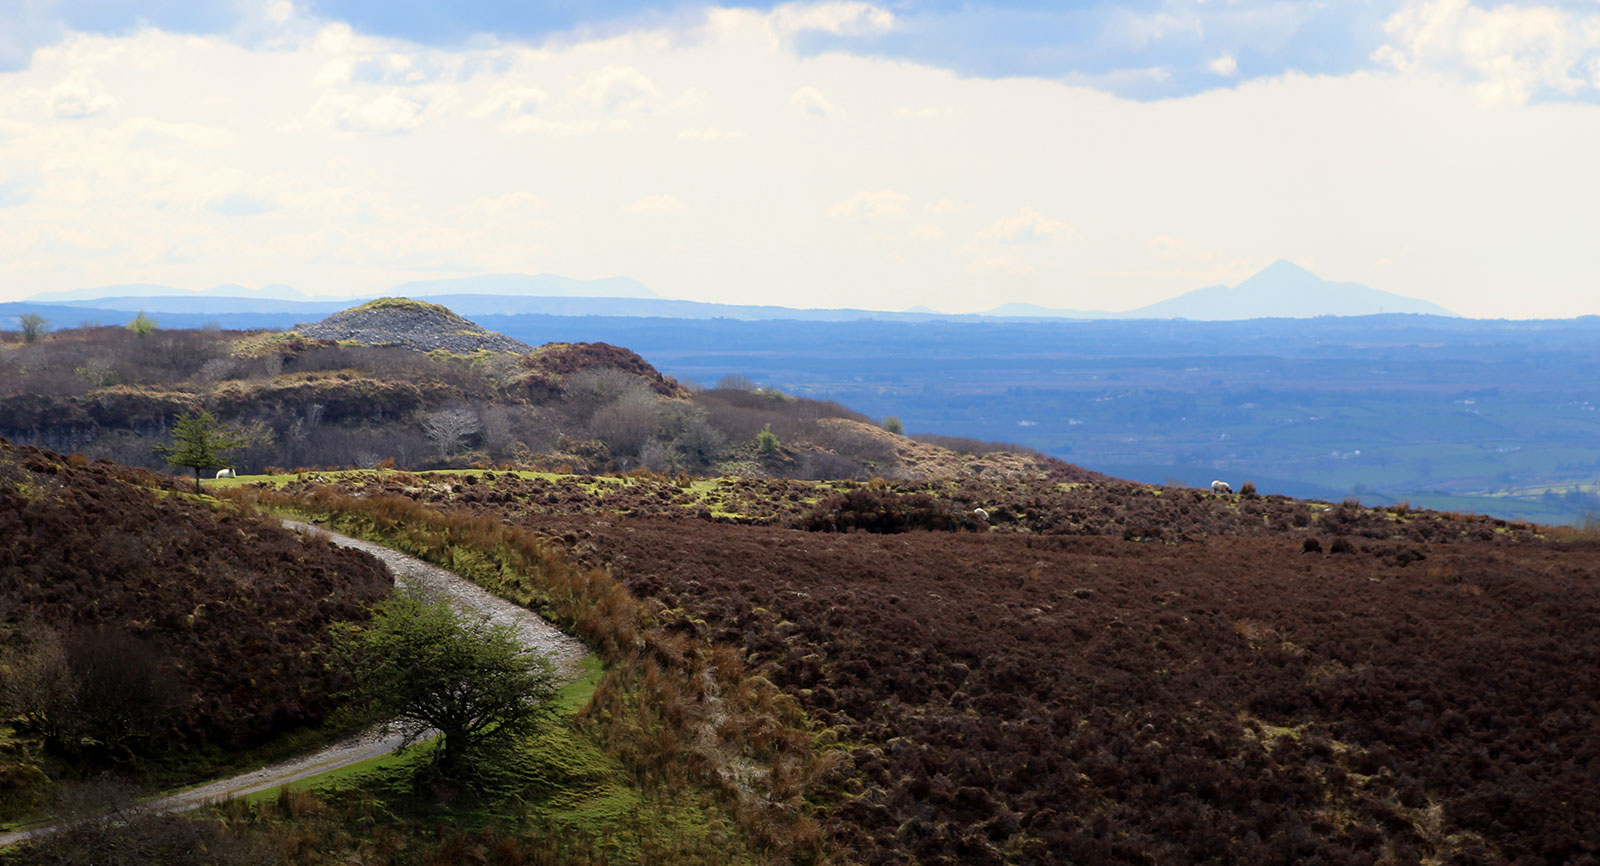 The view from Carrowkeel in County Sligo to Croagh Patrick in County Mayo.